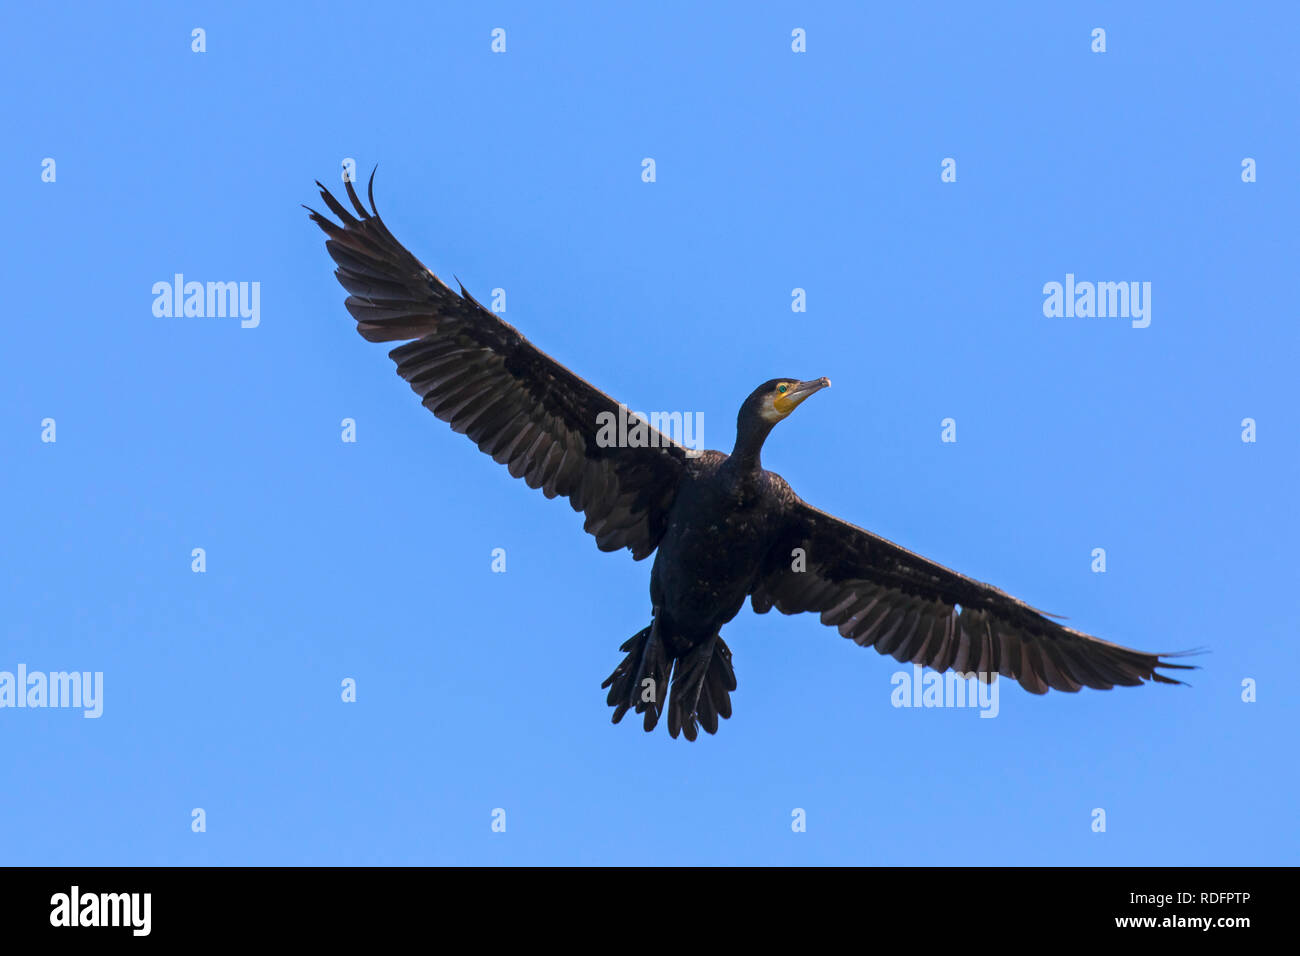 Great cormorant / great black cormorant (Phalacrocorax carbo) flying against blue sky in summer Stock Photo